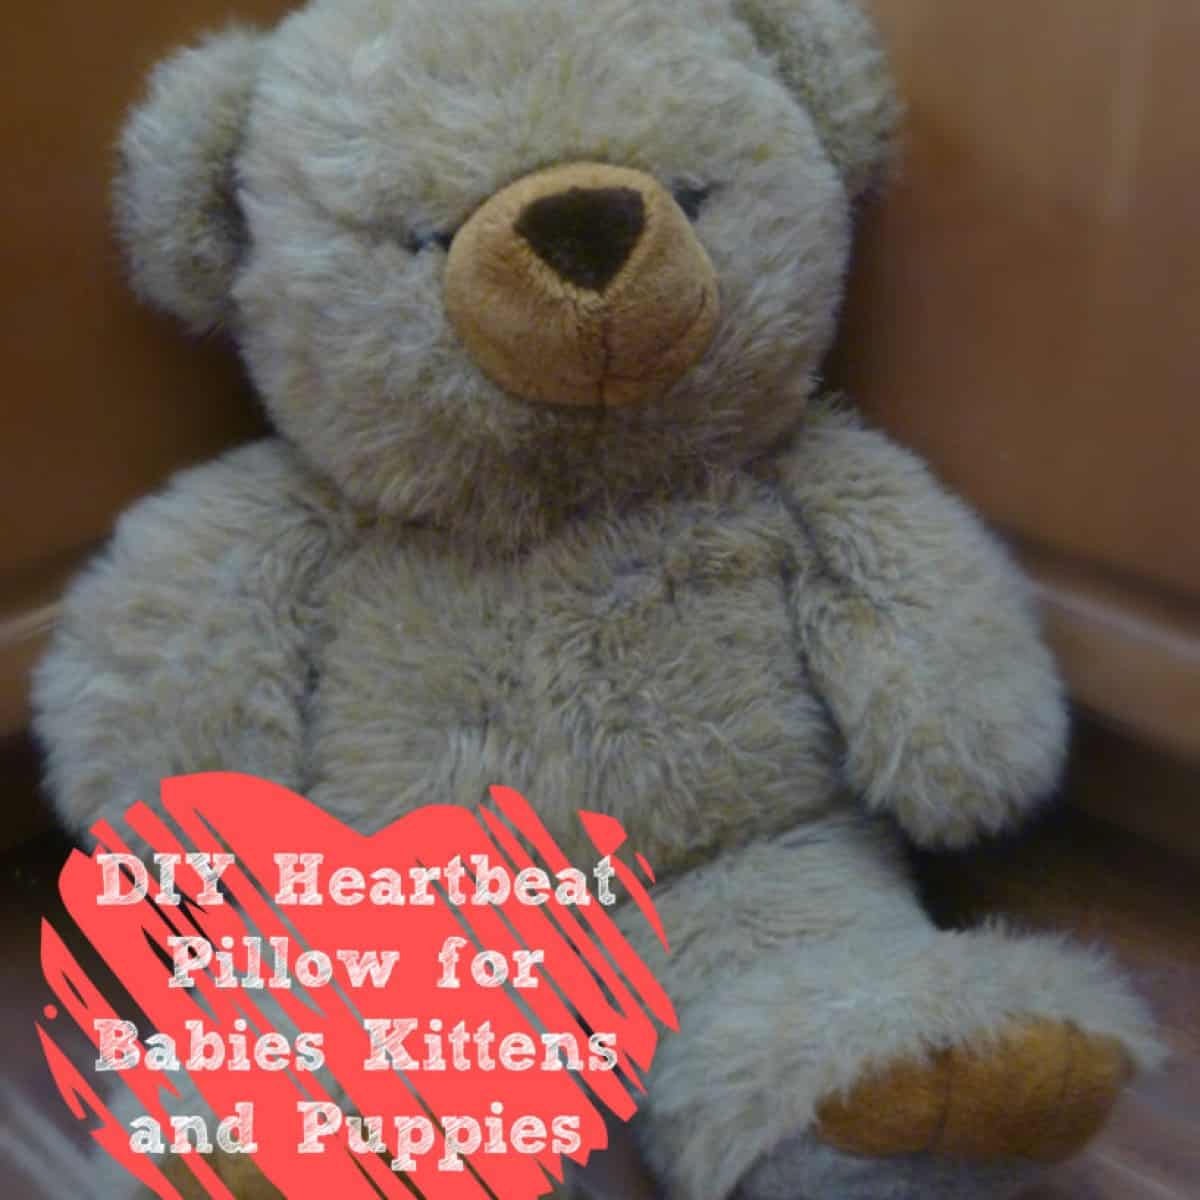 a photo of a stuffed animal. the animal is a tutorial for a do it yourself heartbeat pillow for babies, young children, puppies and kittens